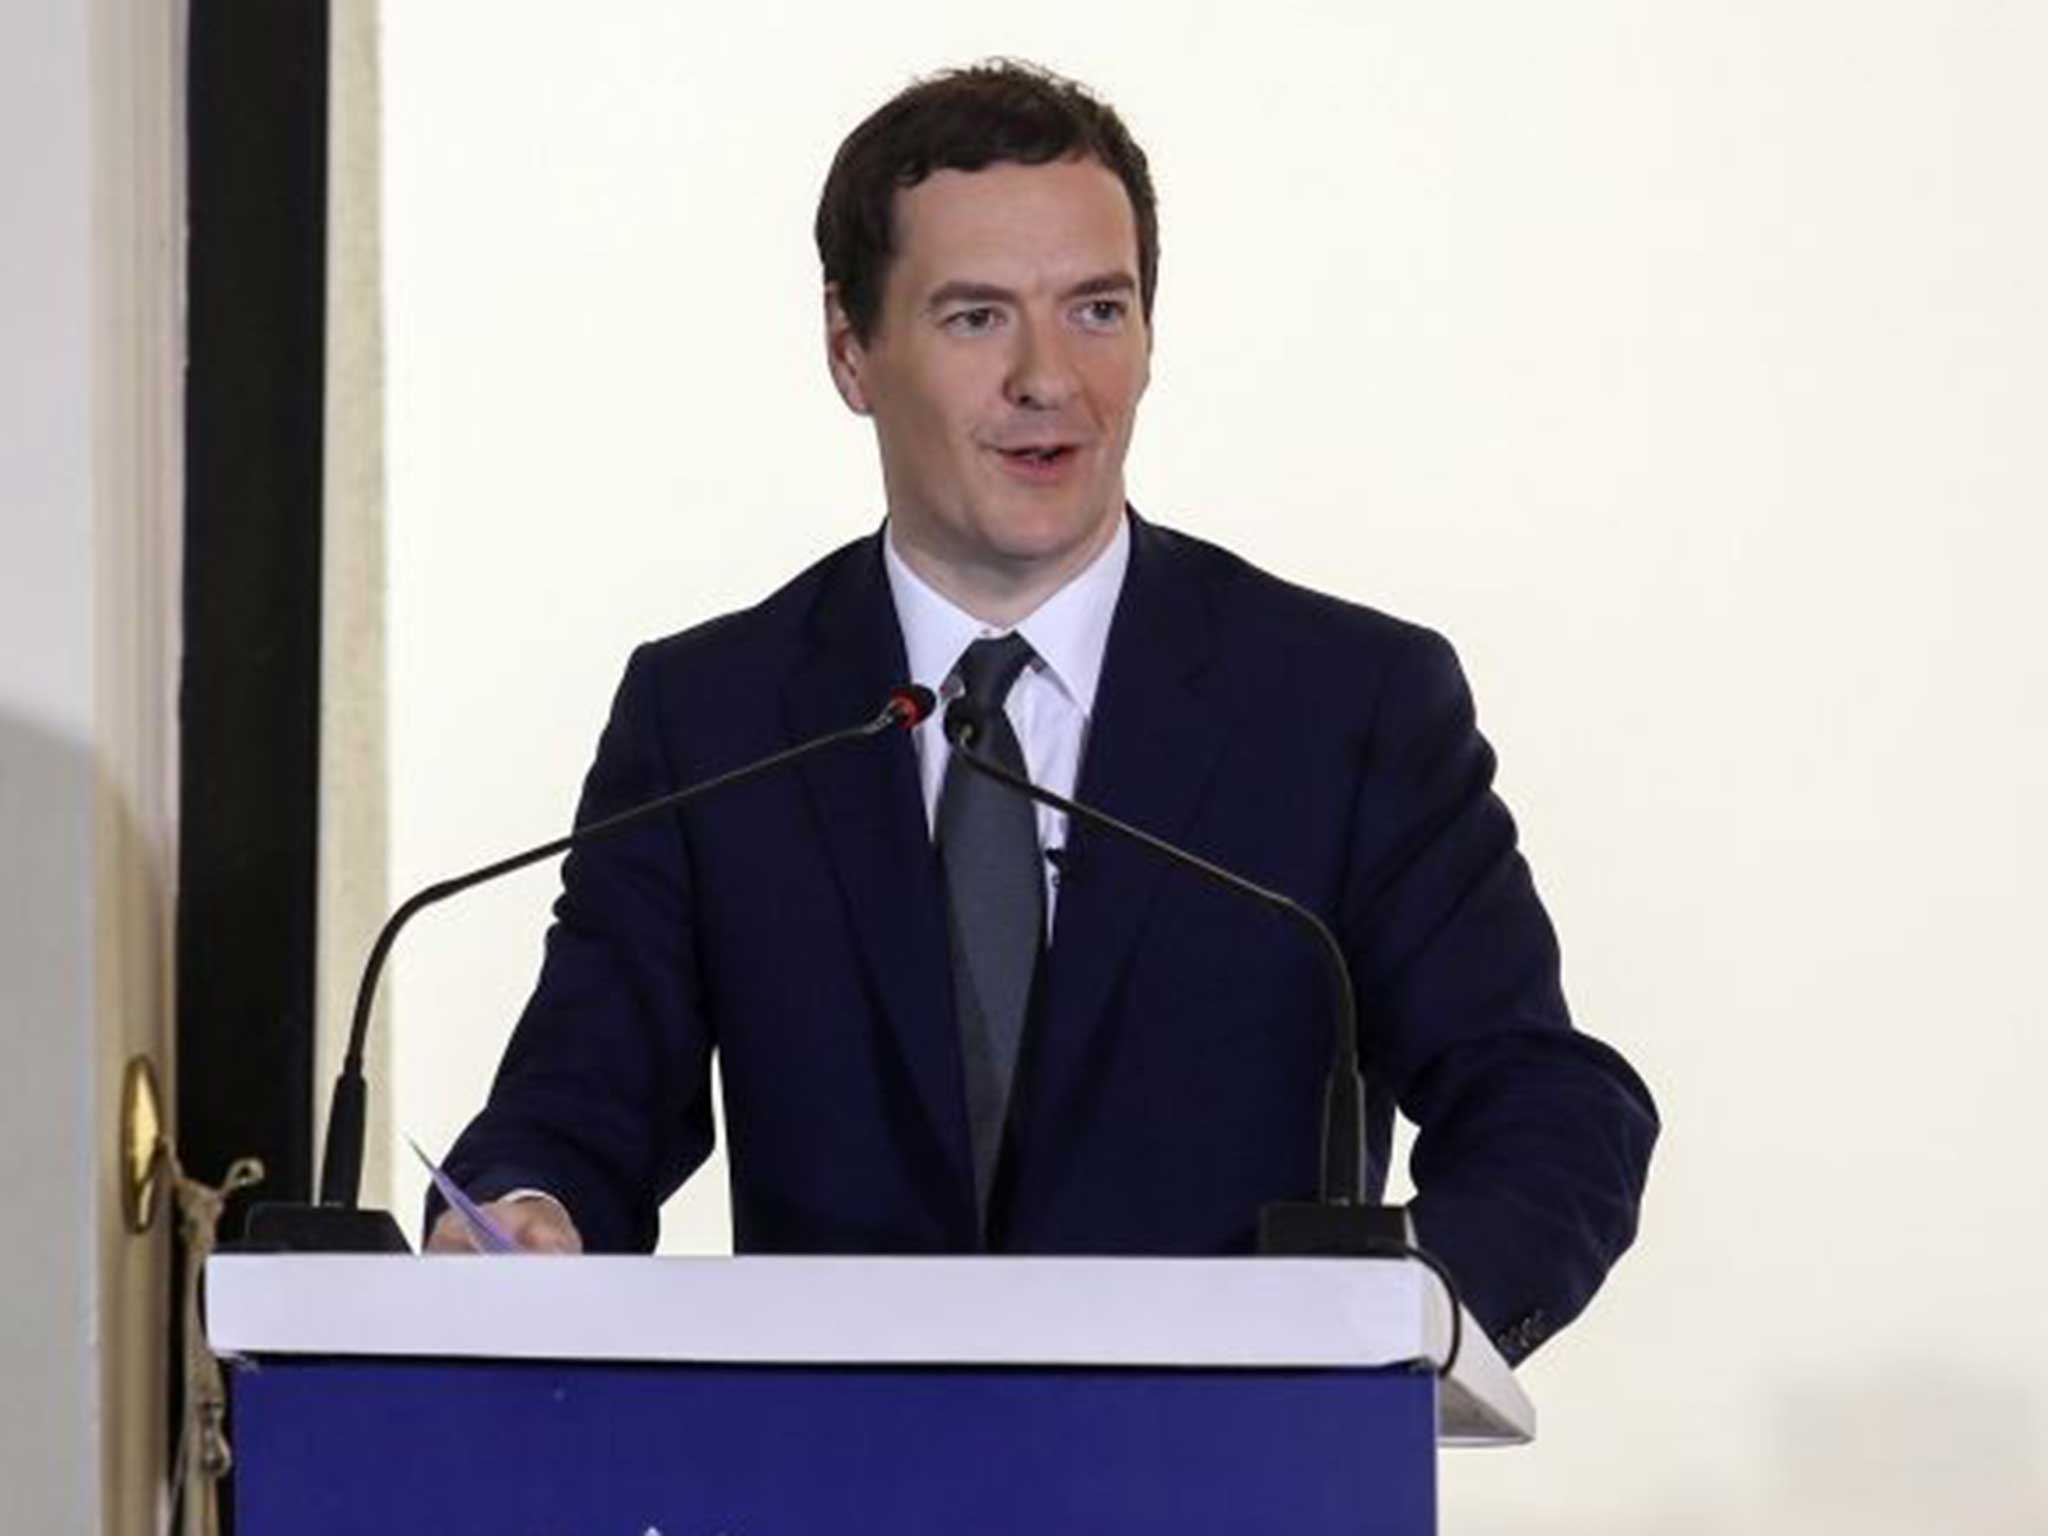 Julien Sevaux, co-founder of £5bn investment firm Stanhope Capital, is currently drafting a letter to George Osborne outlining his ideas to “make all bankers customers”